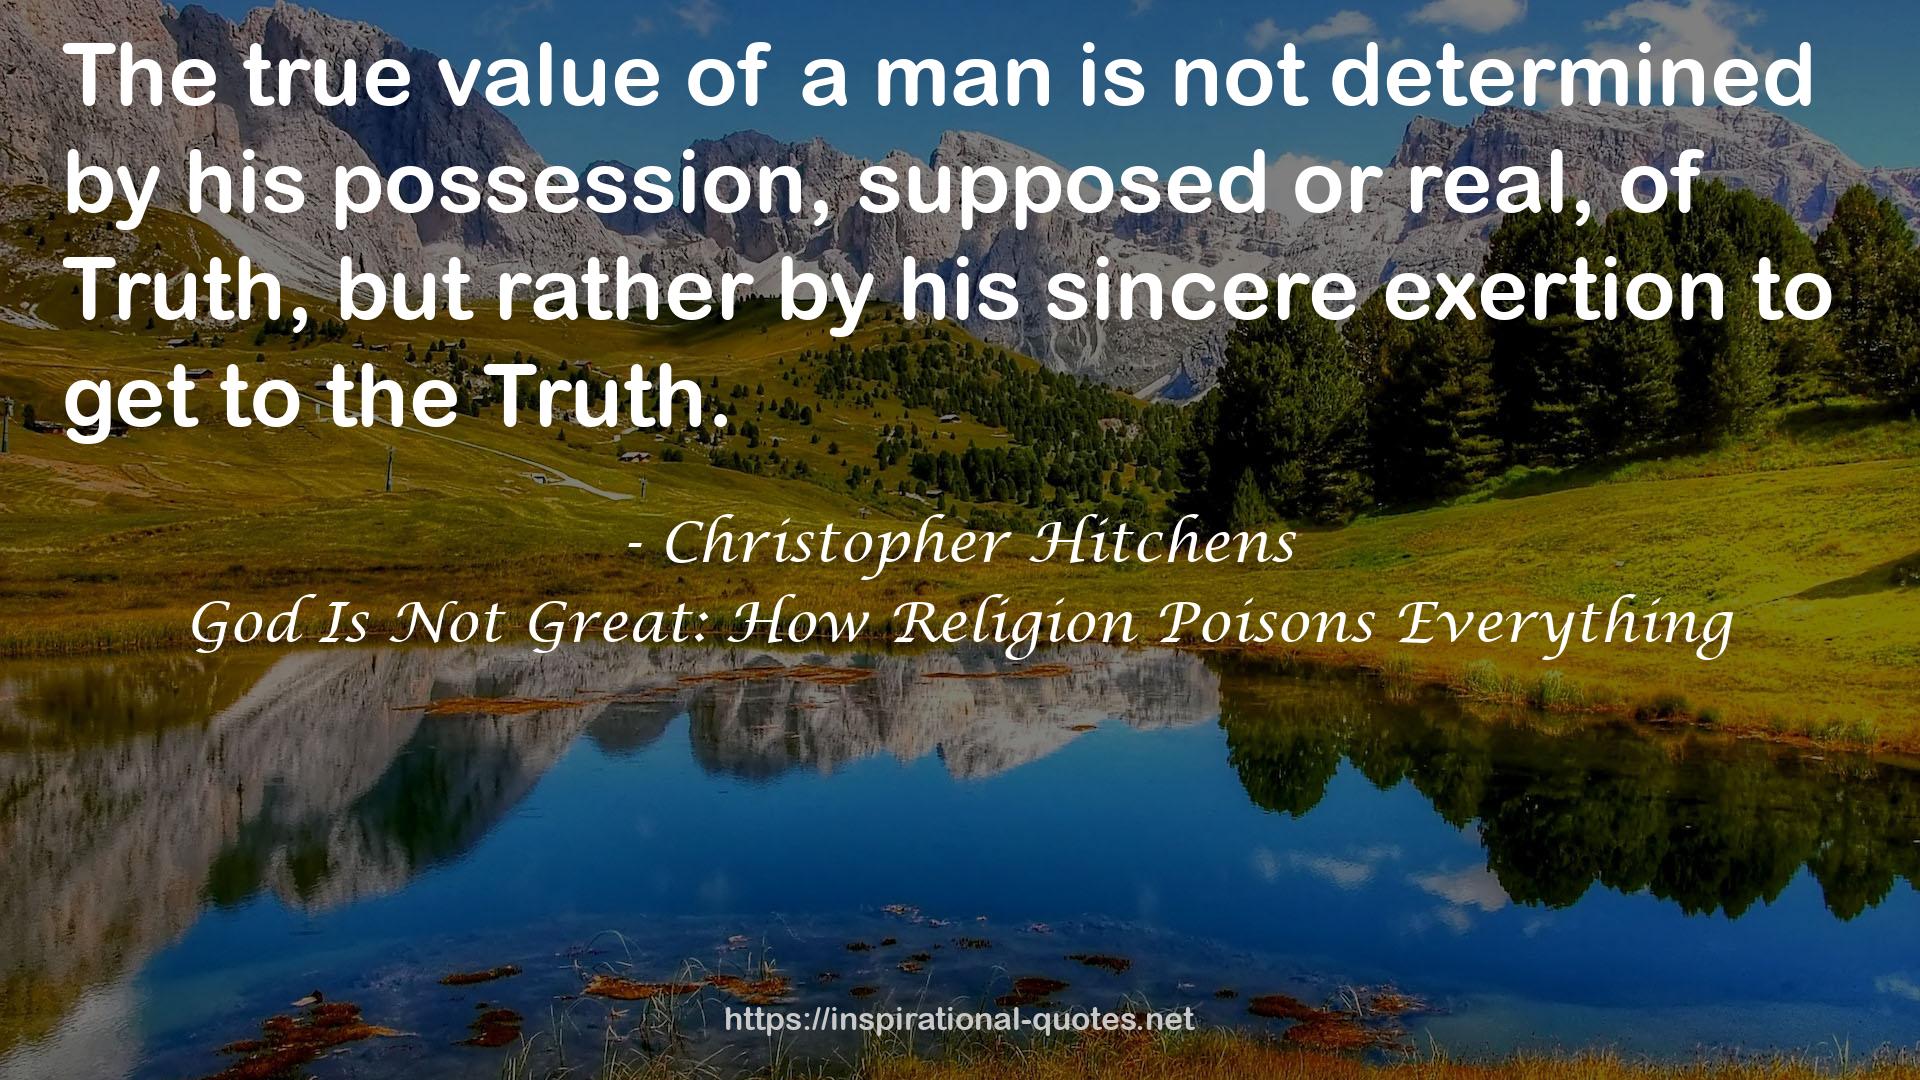 God Is Not Great: How Religion Poisons Everything QUOTES